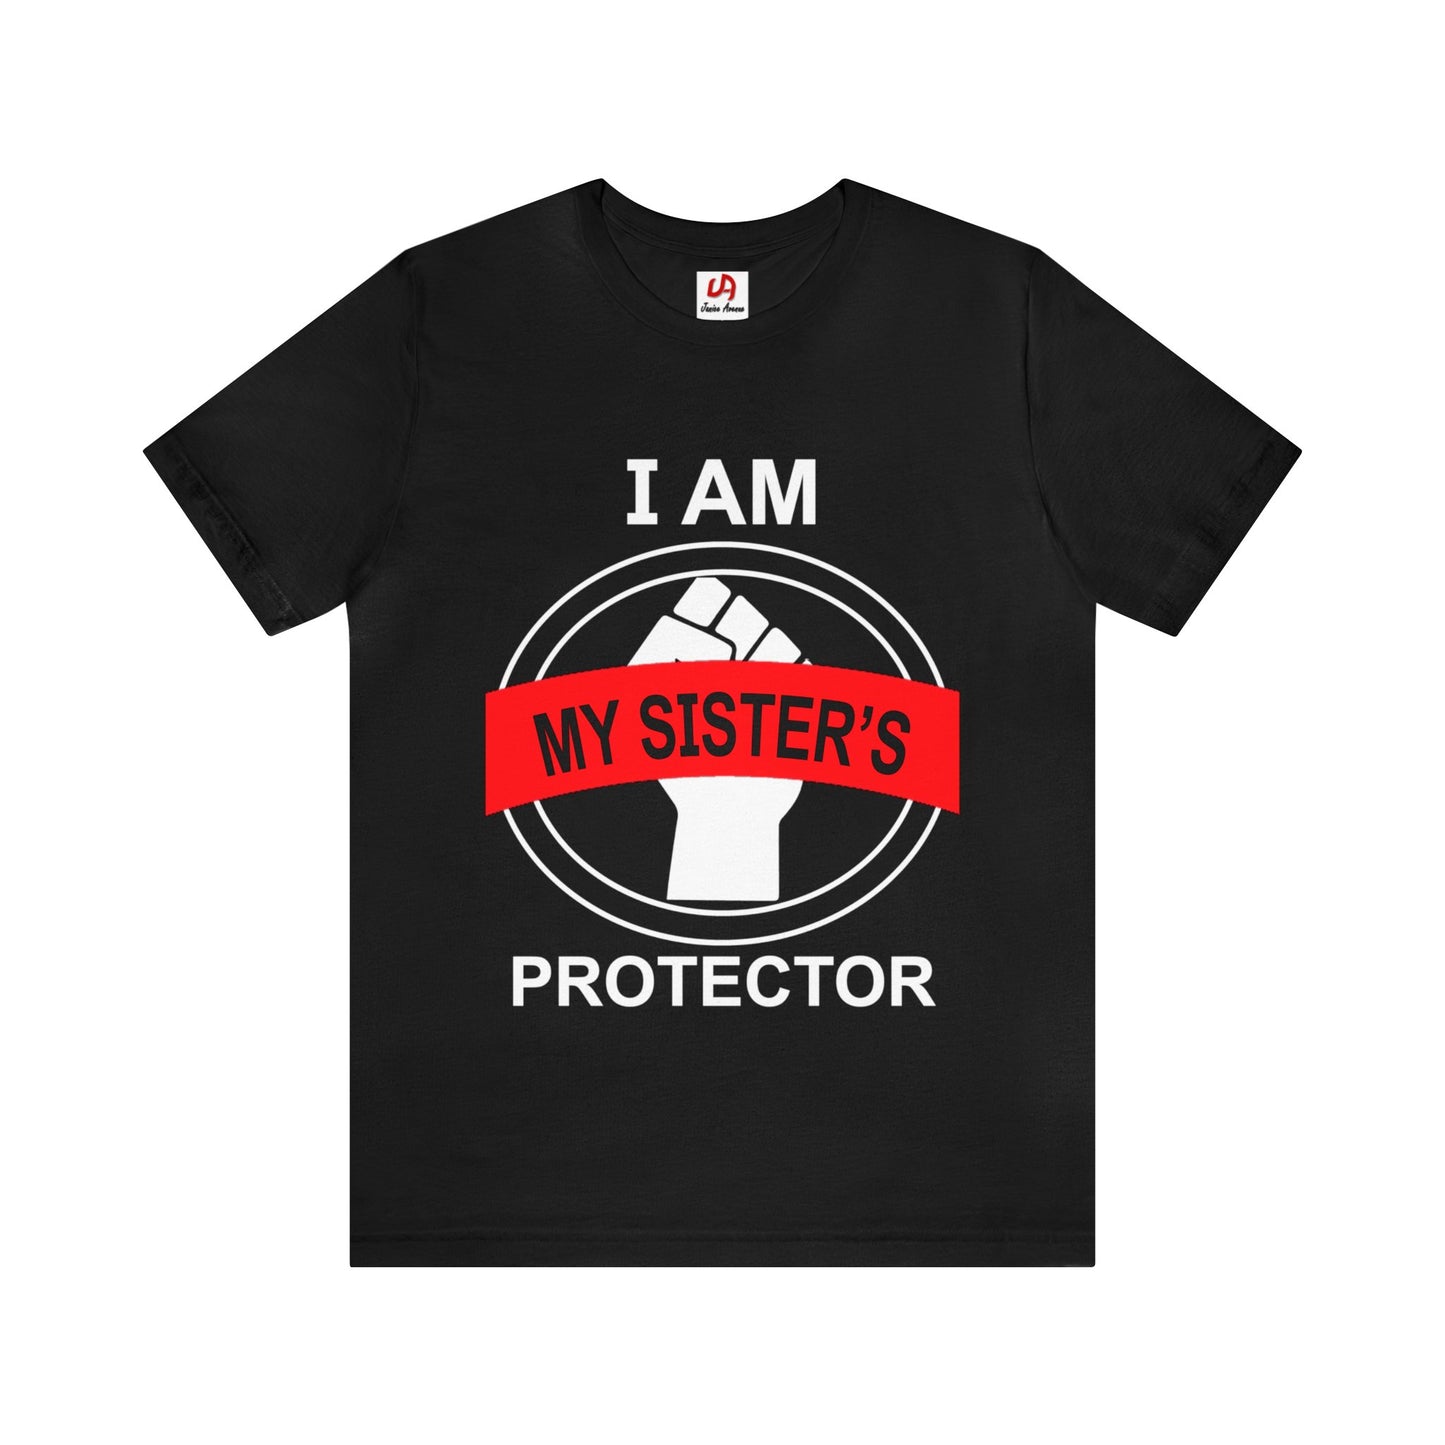 My Sisters Protector Shirt - White Text